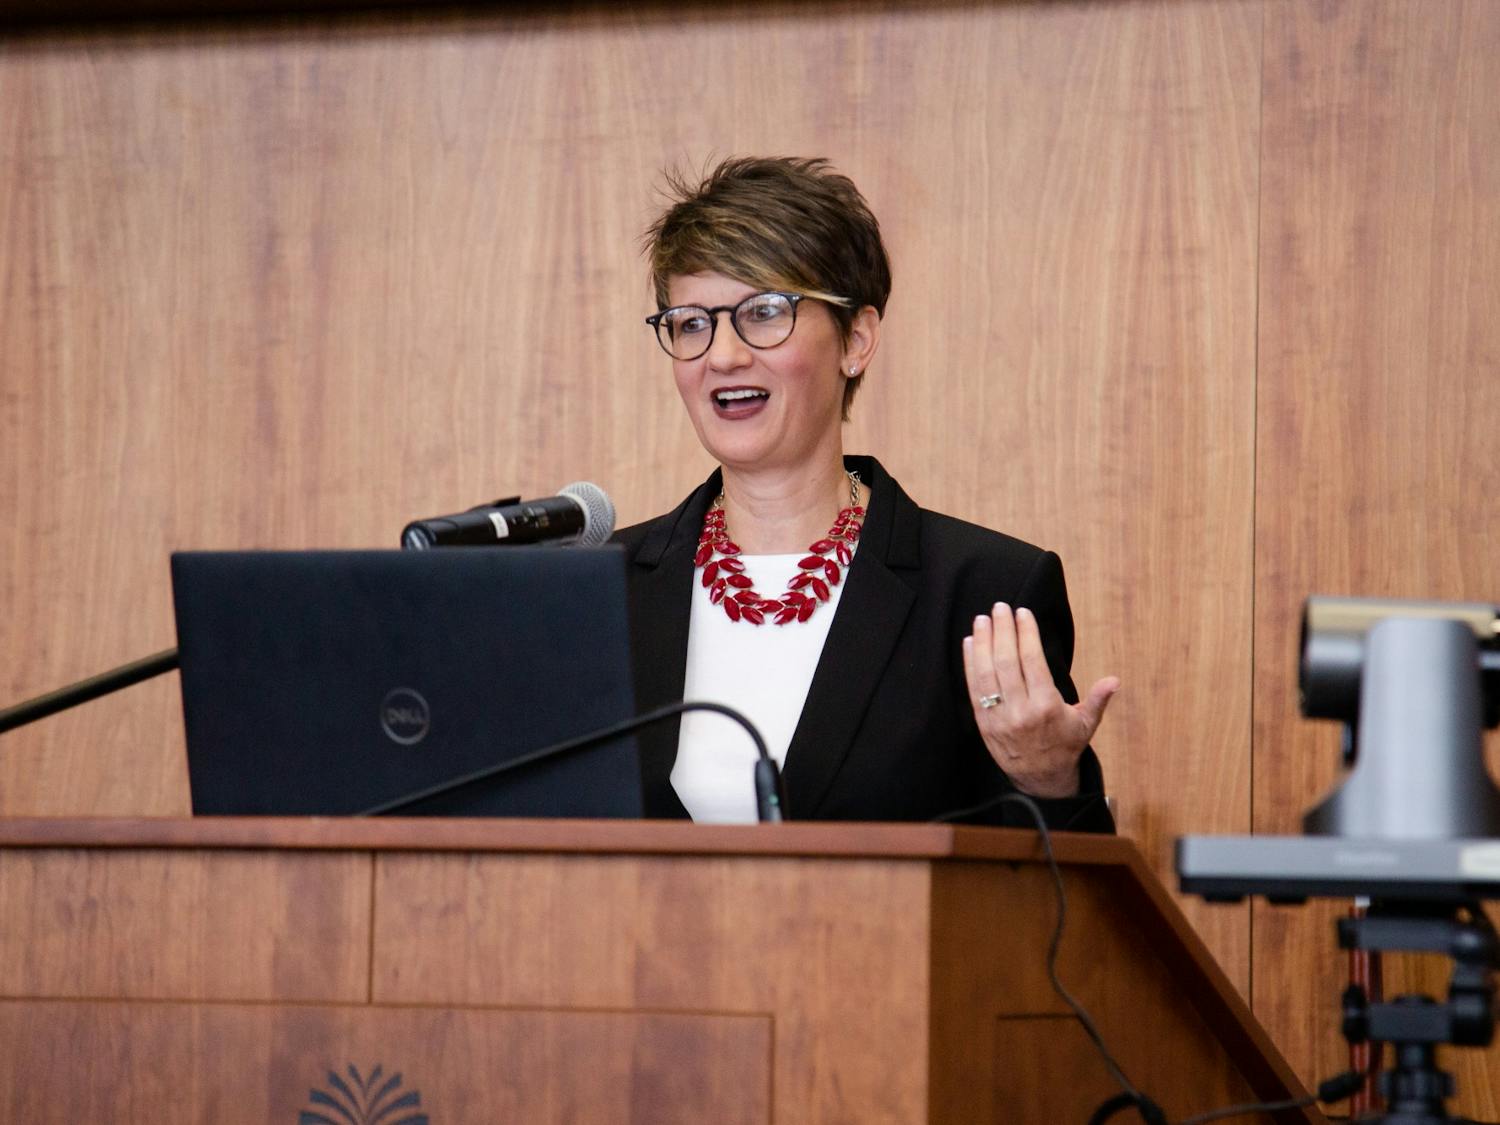 Brandi Hephner LaBanc speaks during a presentation and Q&amp;A session on July 11. Three candidates visited campus throughout July to compete for the position of vice president of student affairs and academic support.&nbsp;